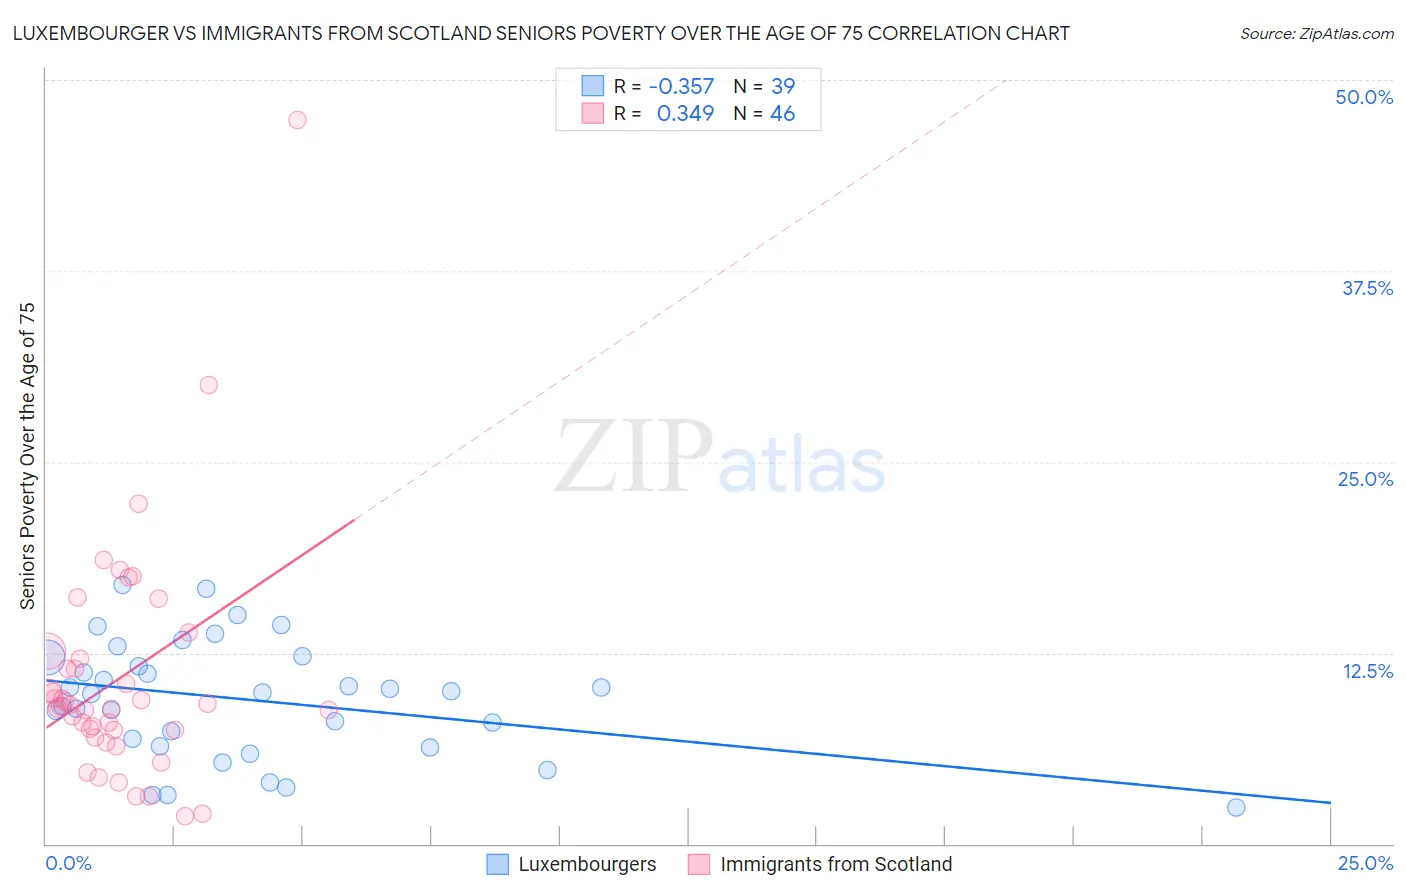 Luxembourger vs Immigrants from Scotland Seniors Poverty Over the Age of 75